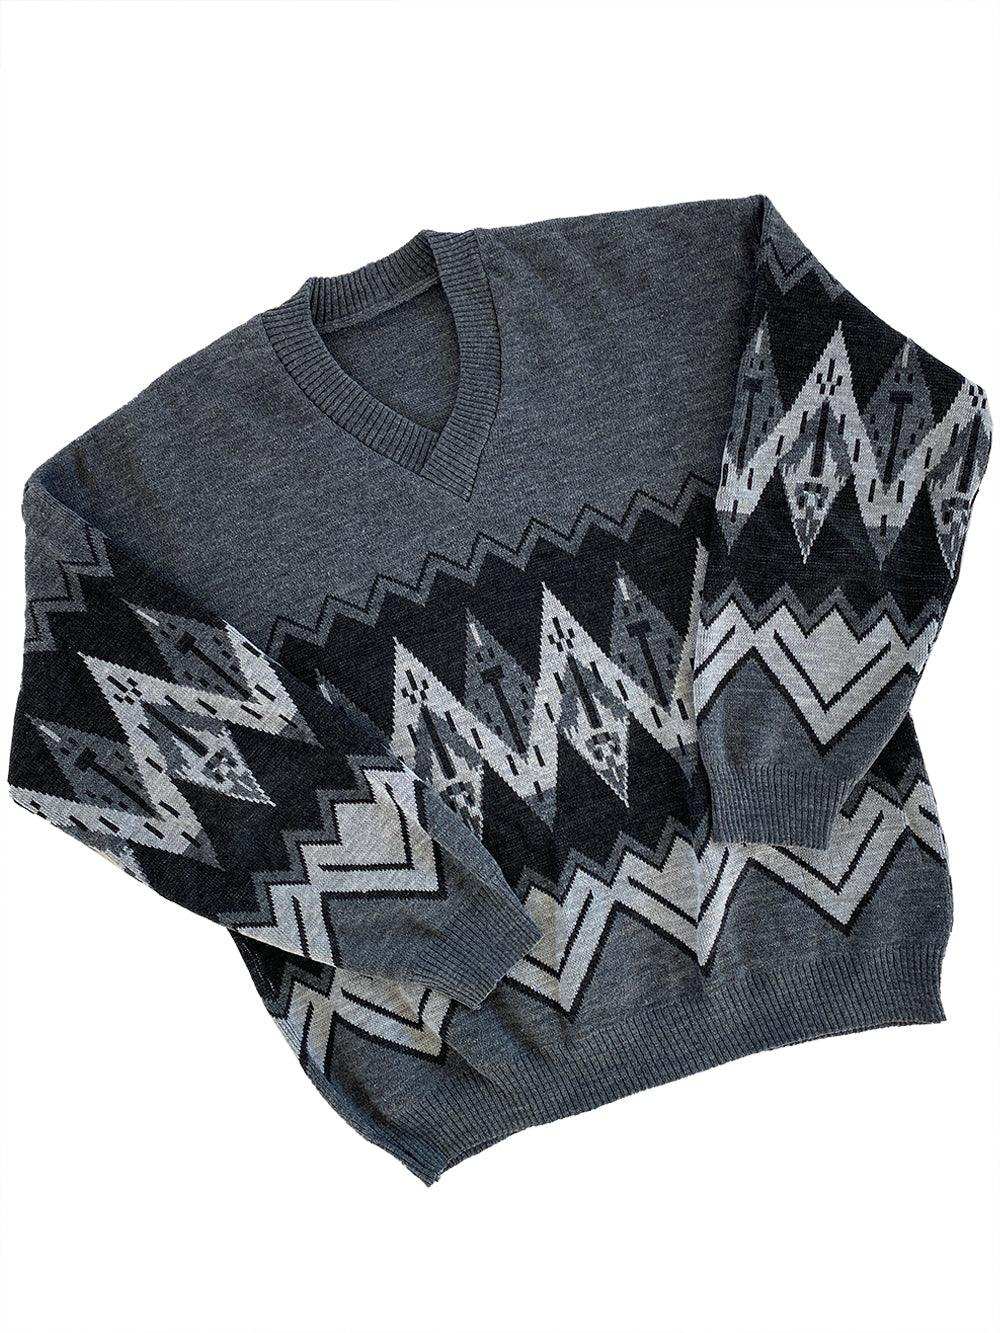 Vintage 80s/90s Unisex Knitted Geometric Sweater - Balagan Vintage Sweater 00s, 80s, 90s, knitted sweater, NEW IN, sweater